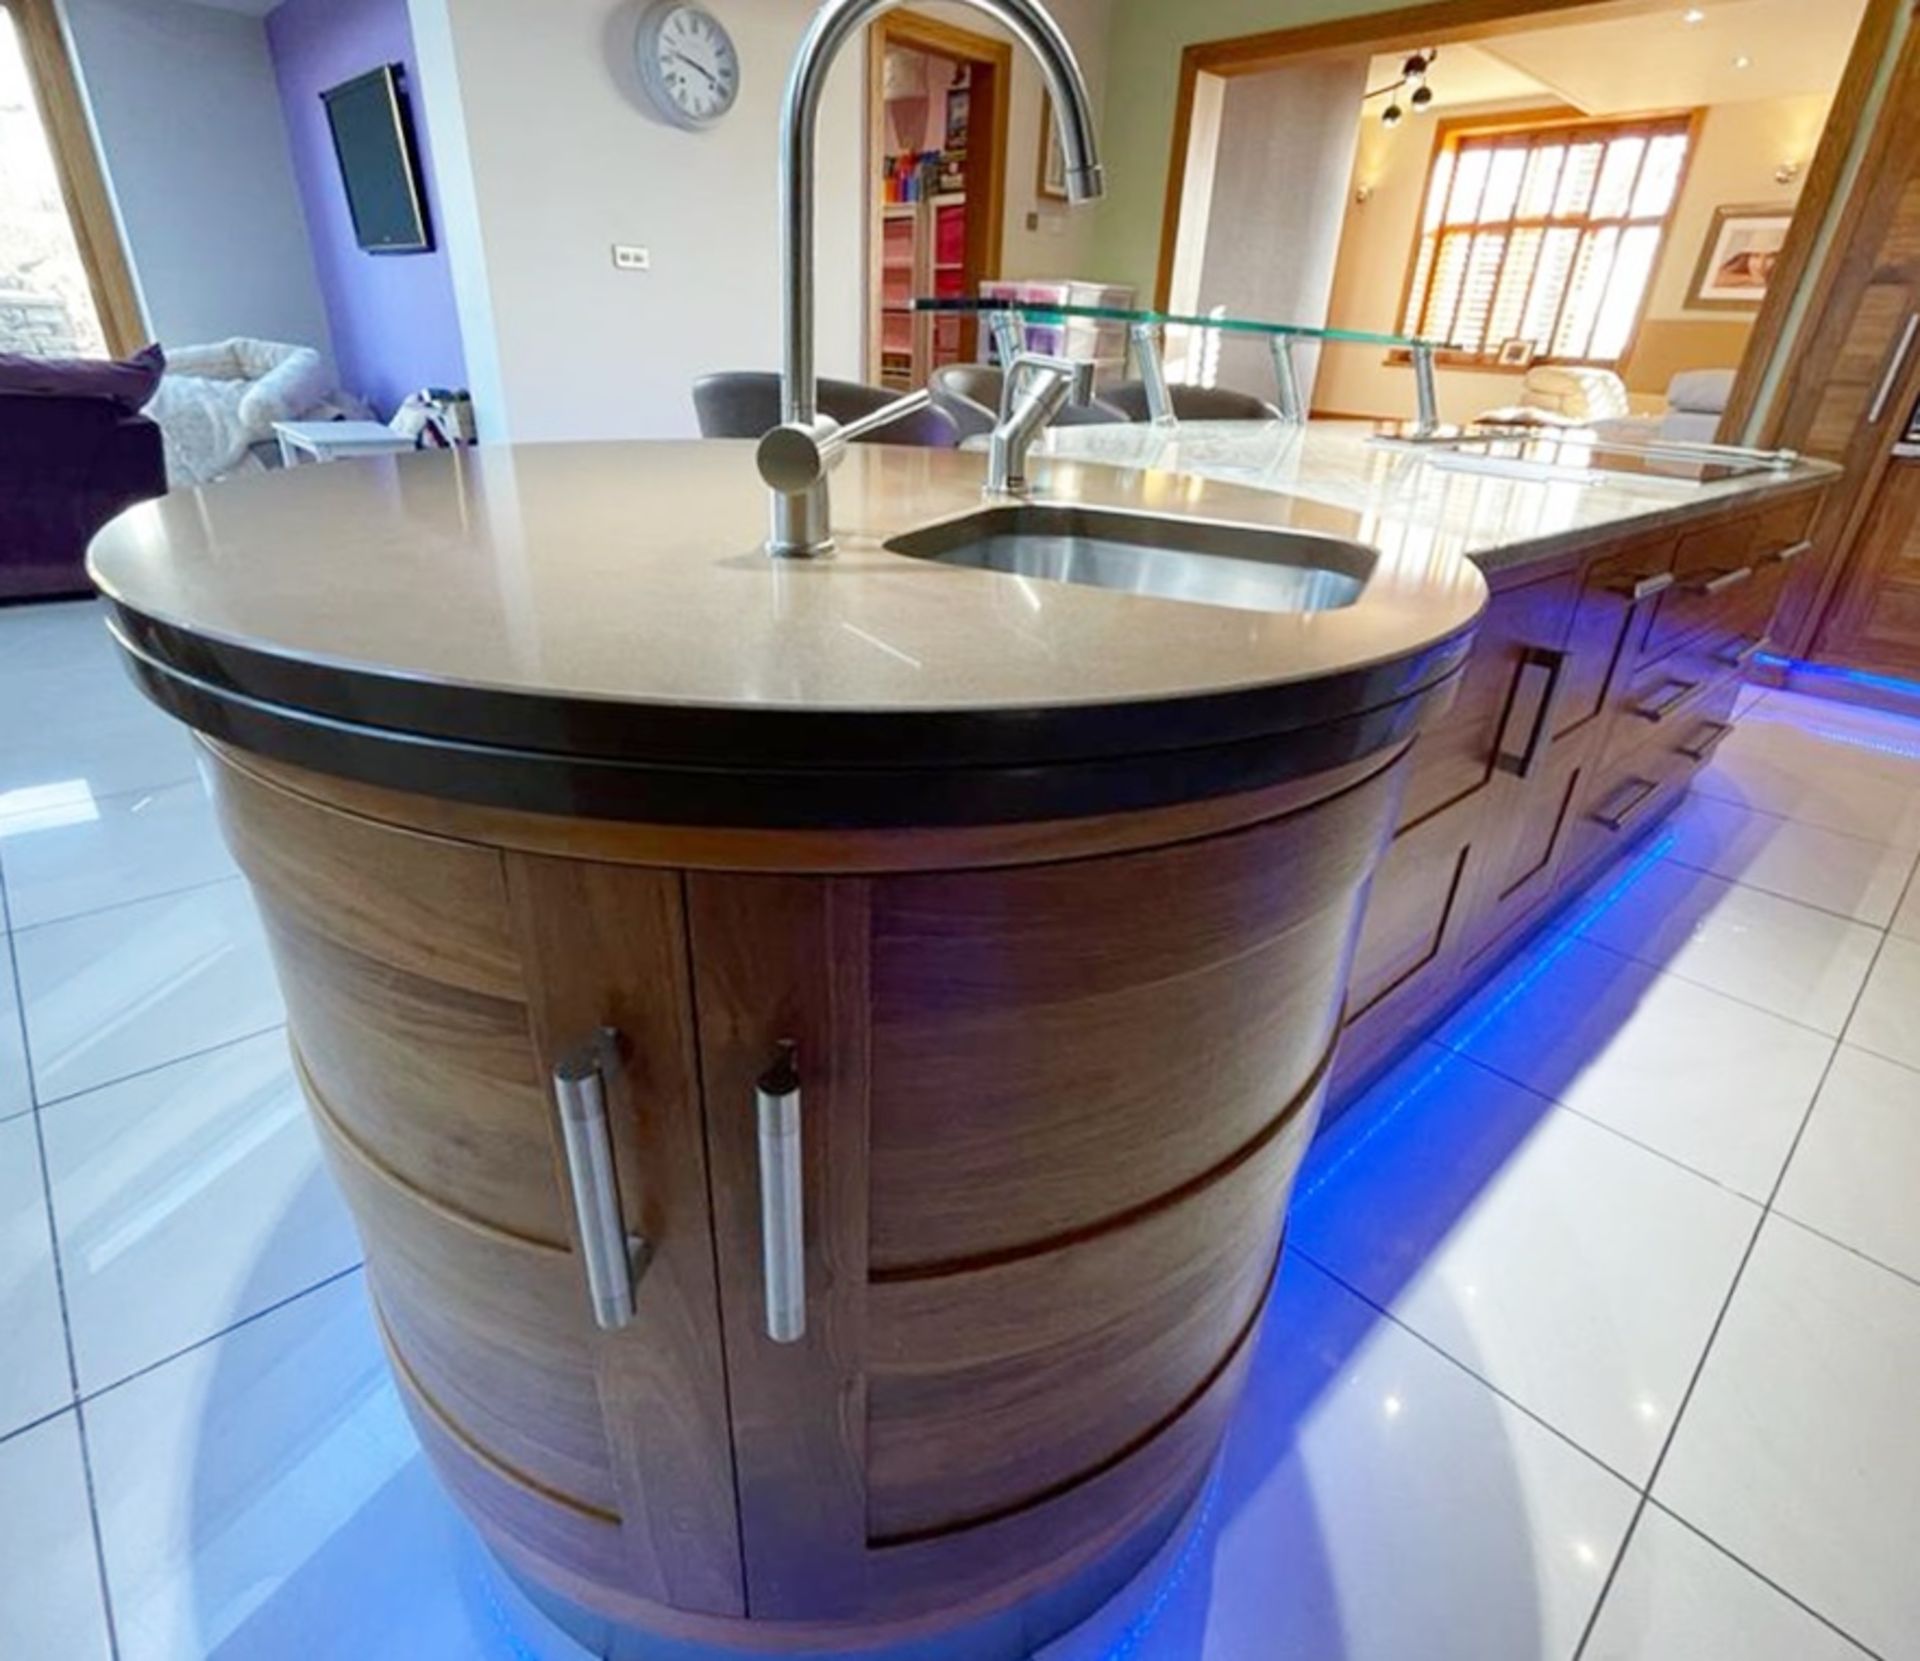 1 x Bespoke Curved Fitted Kitchen With Solid Wood Walnut Doors, Integrated Appliances, Granite Tops - Image 83 of 147